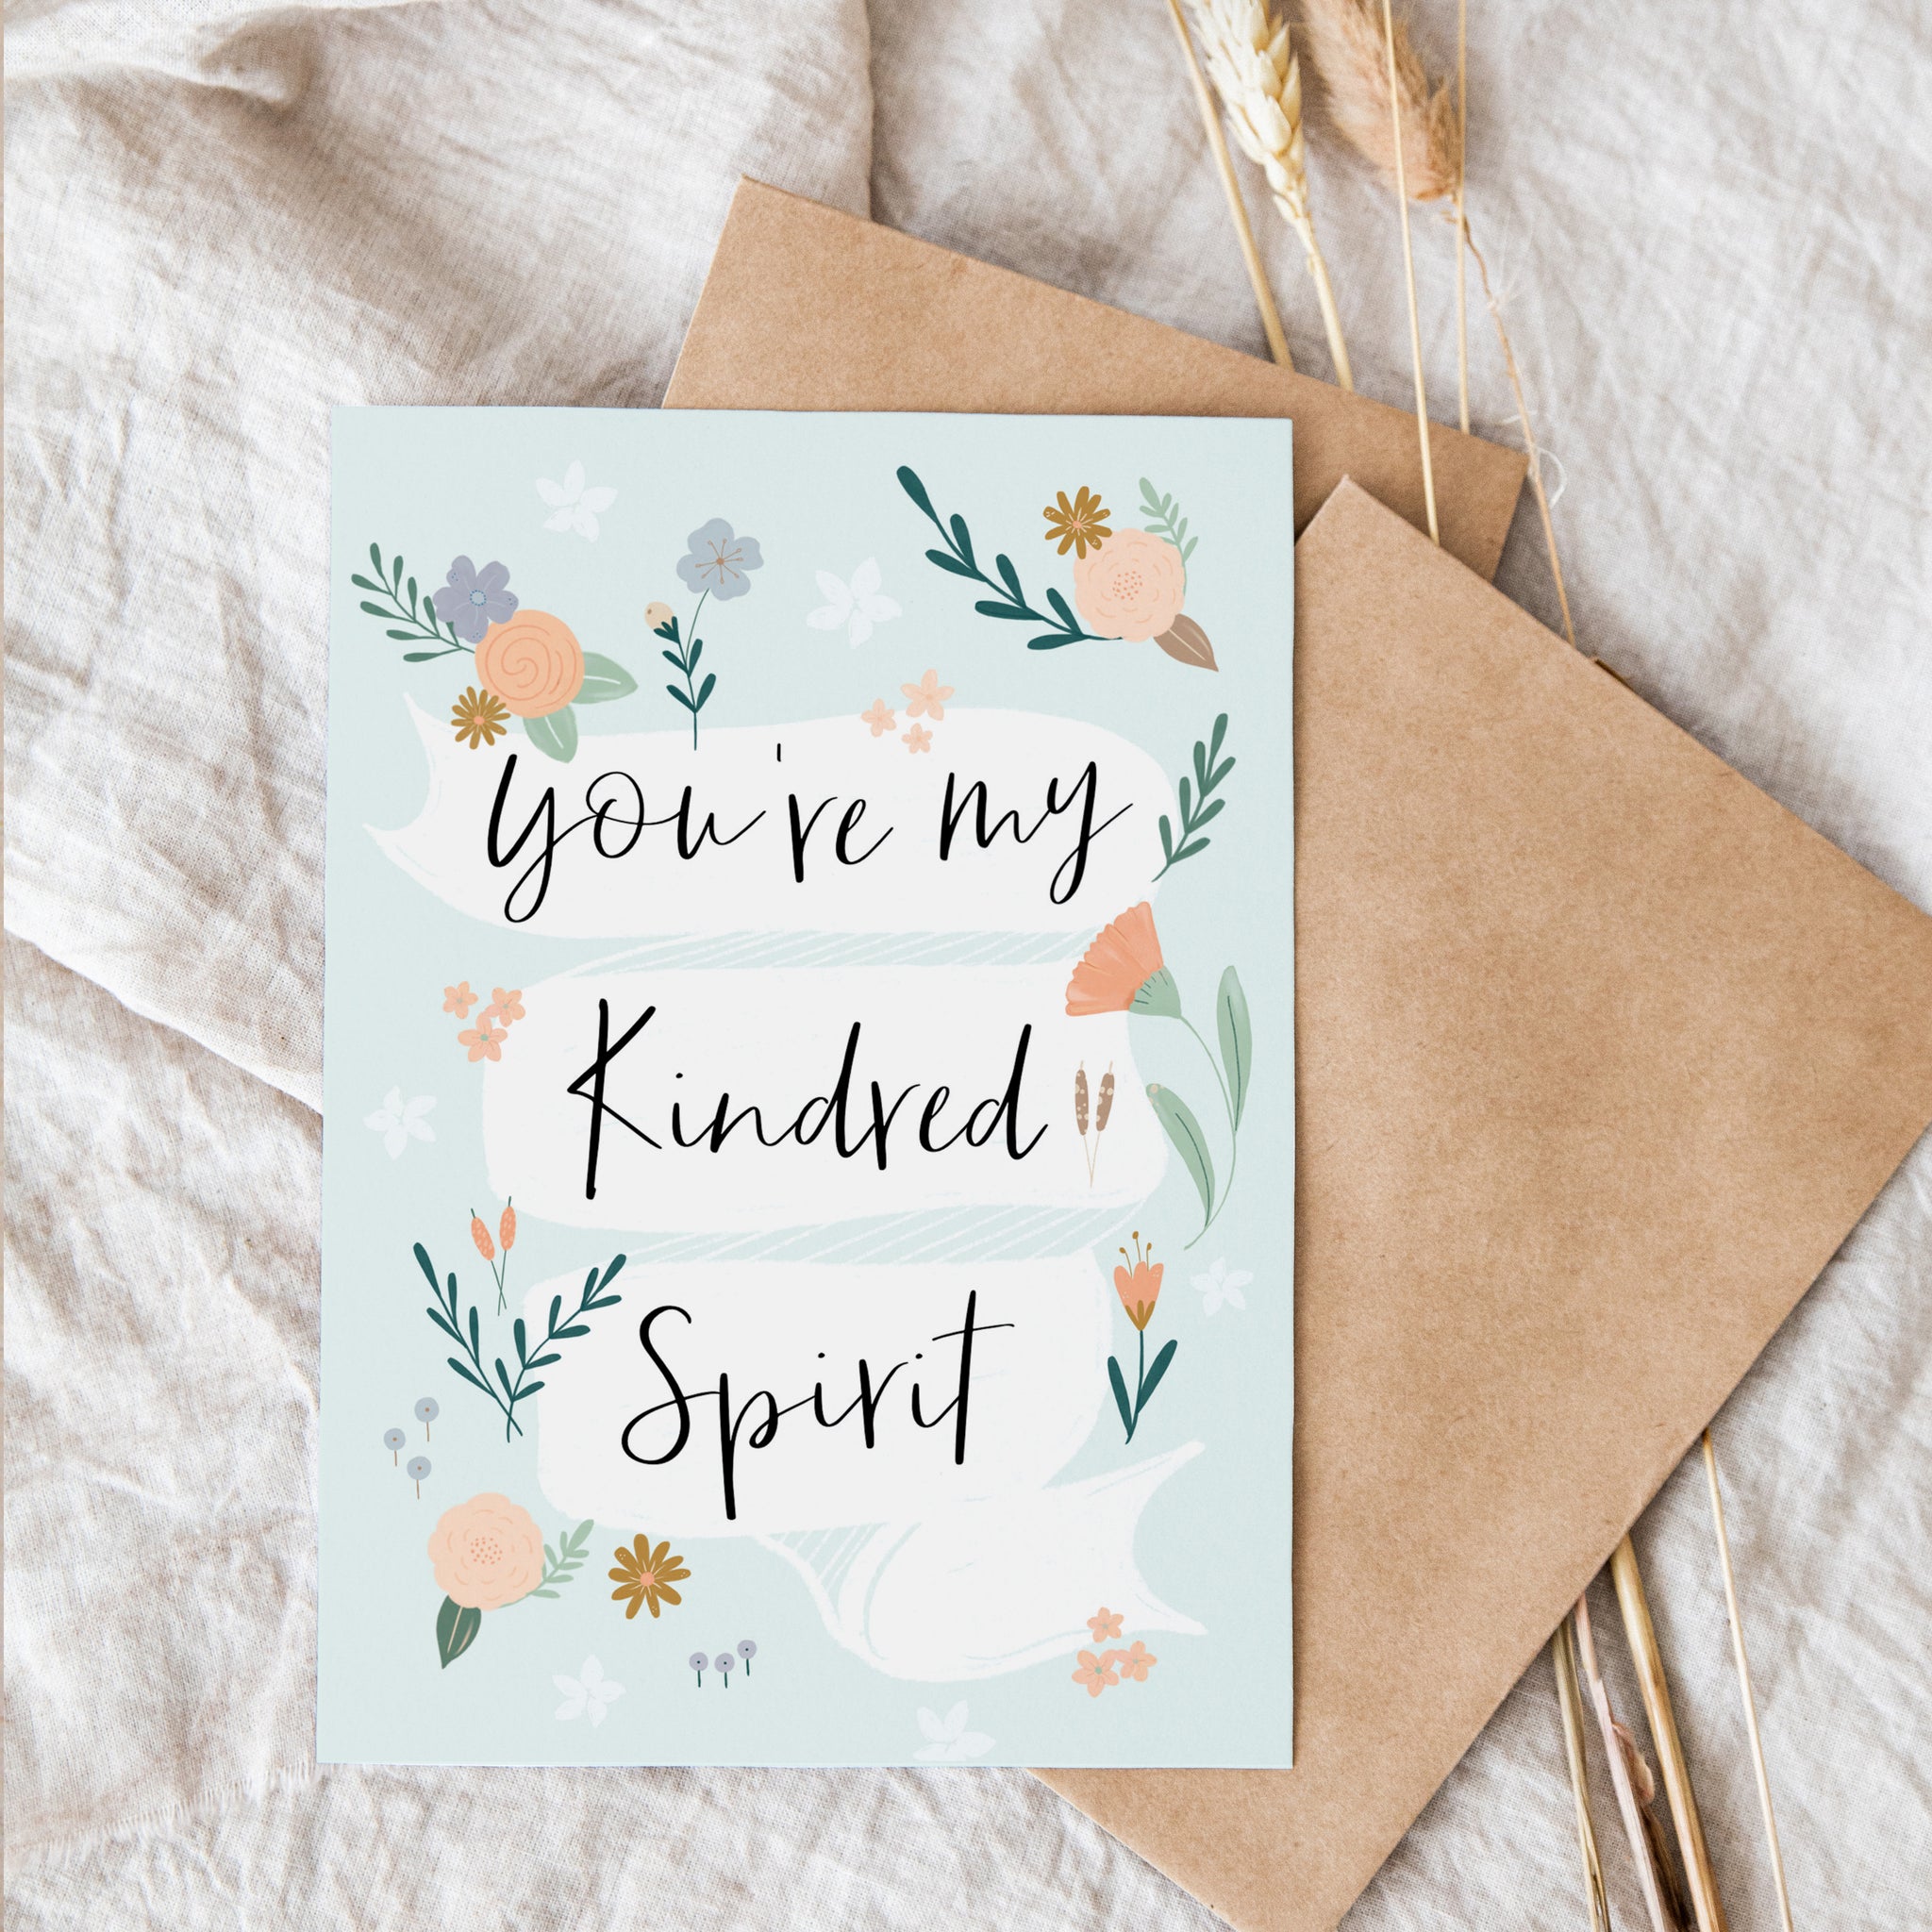 You're my Kindred Spirit Greeting Card/Friendship Card/ Valentines Day Card/Galentines Card/Thinking of you Card/Cute Card/Card for Her